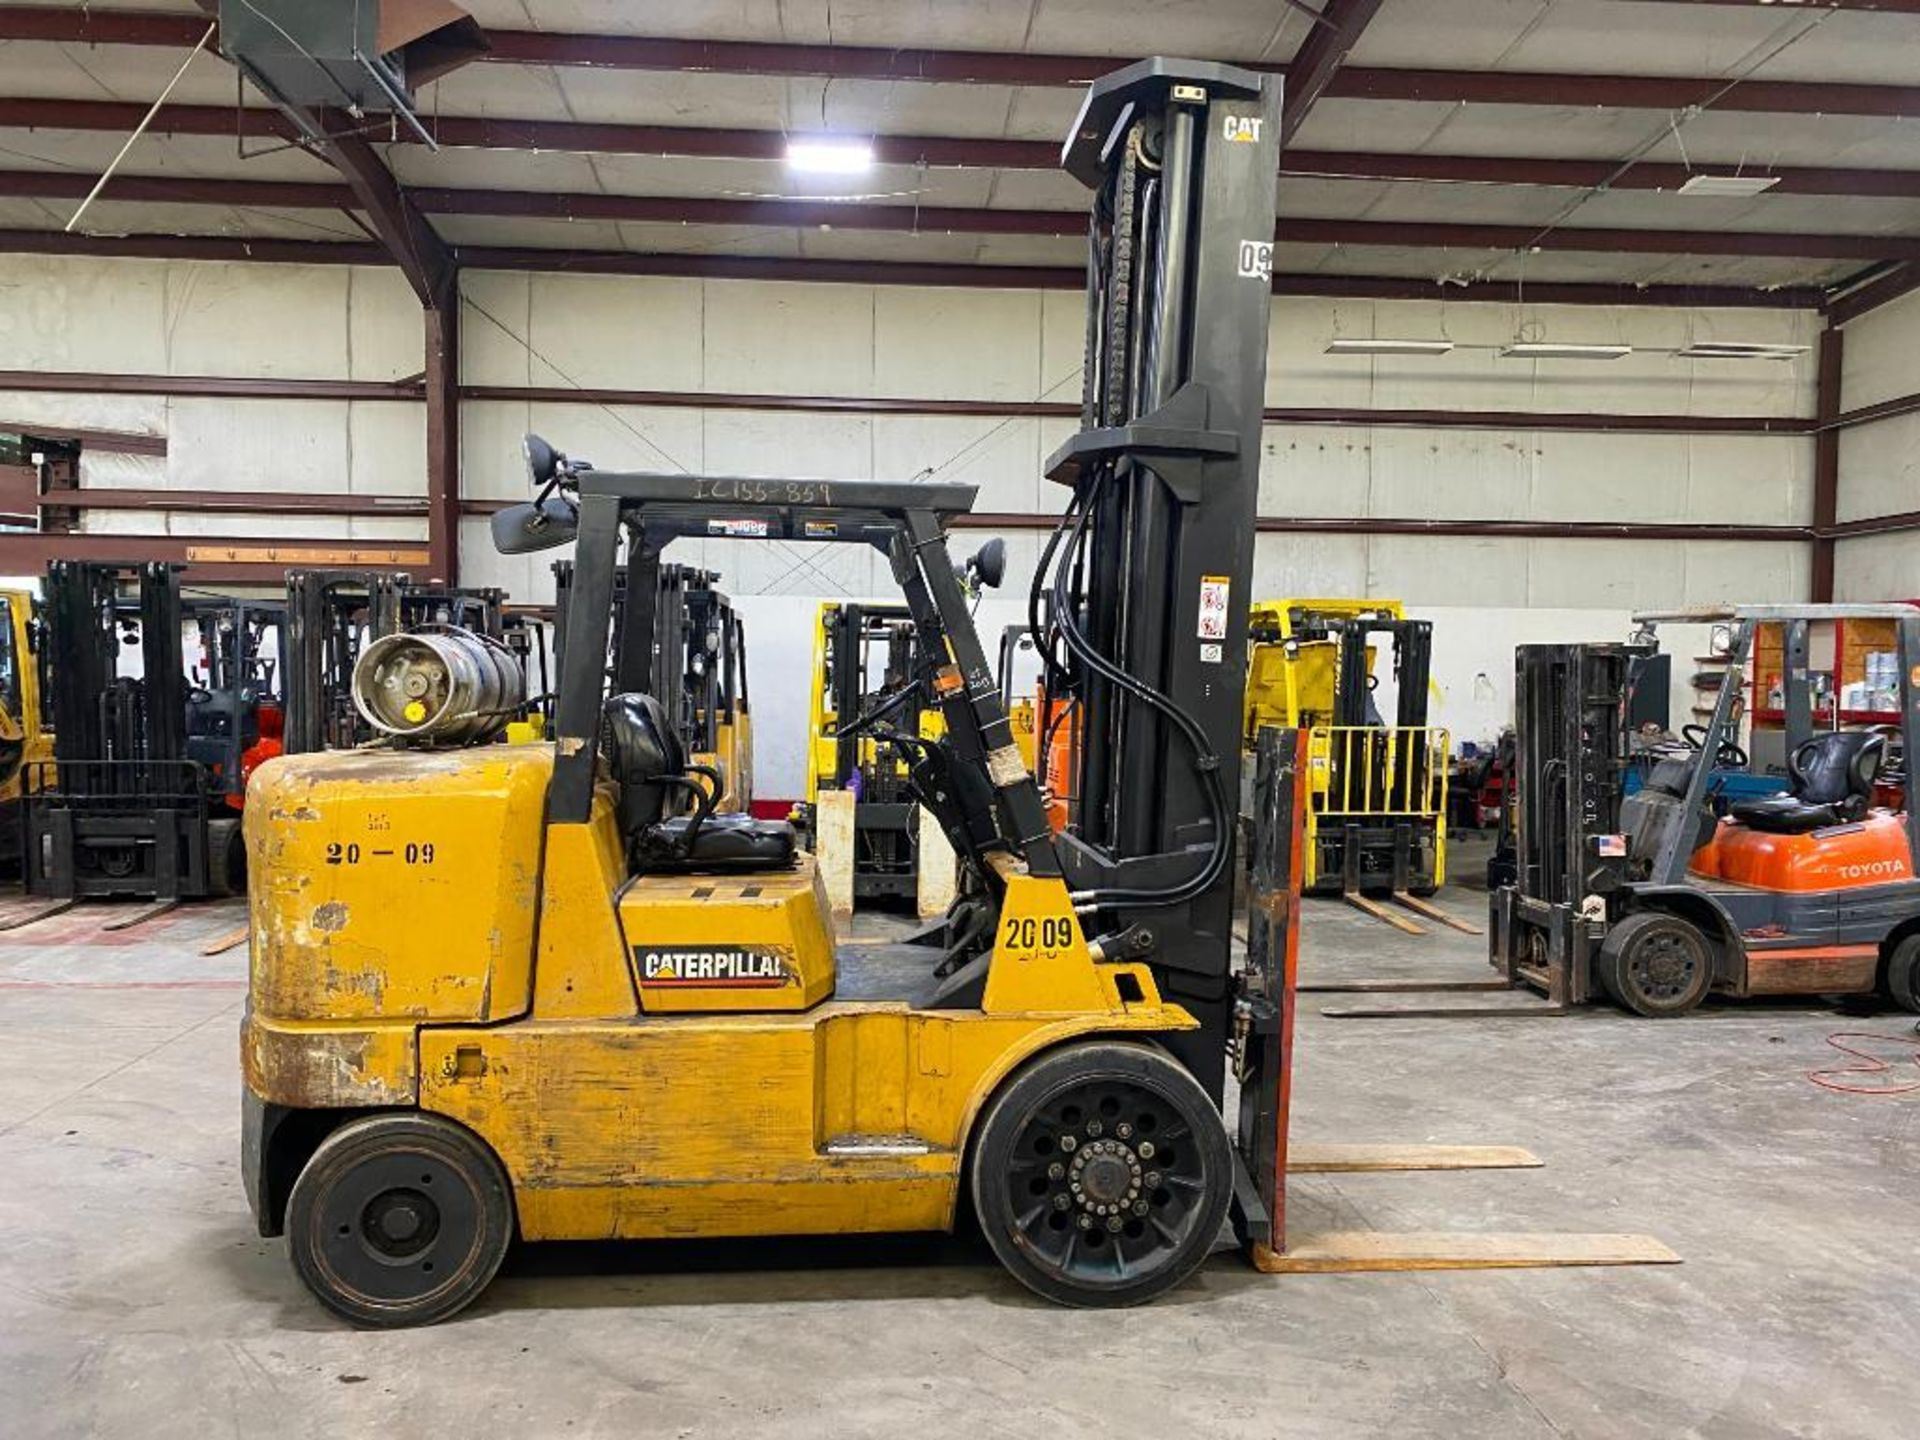 Caterpillar 15,500-LB. Capacity Forklift, Model GC70K, S/N AT8900859, LPG, Cushion Tires, 3-Stage Ma - Image 3 of 5